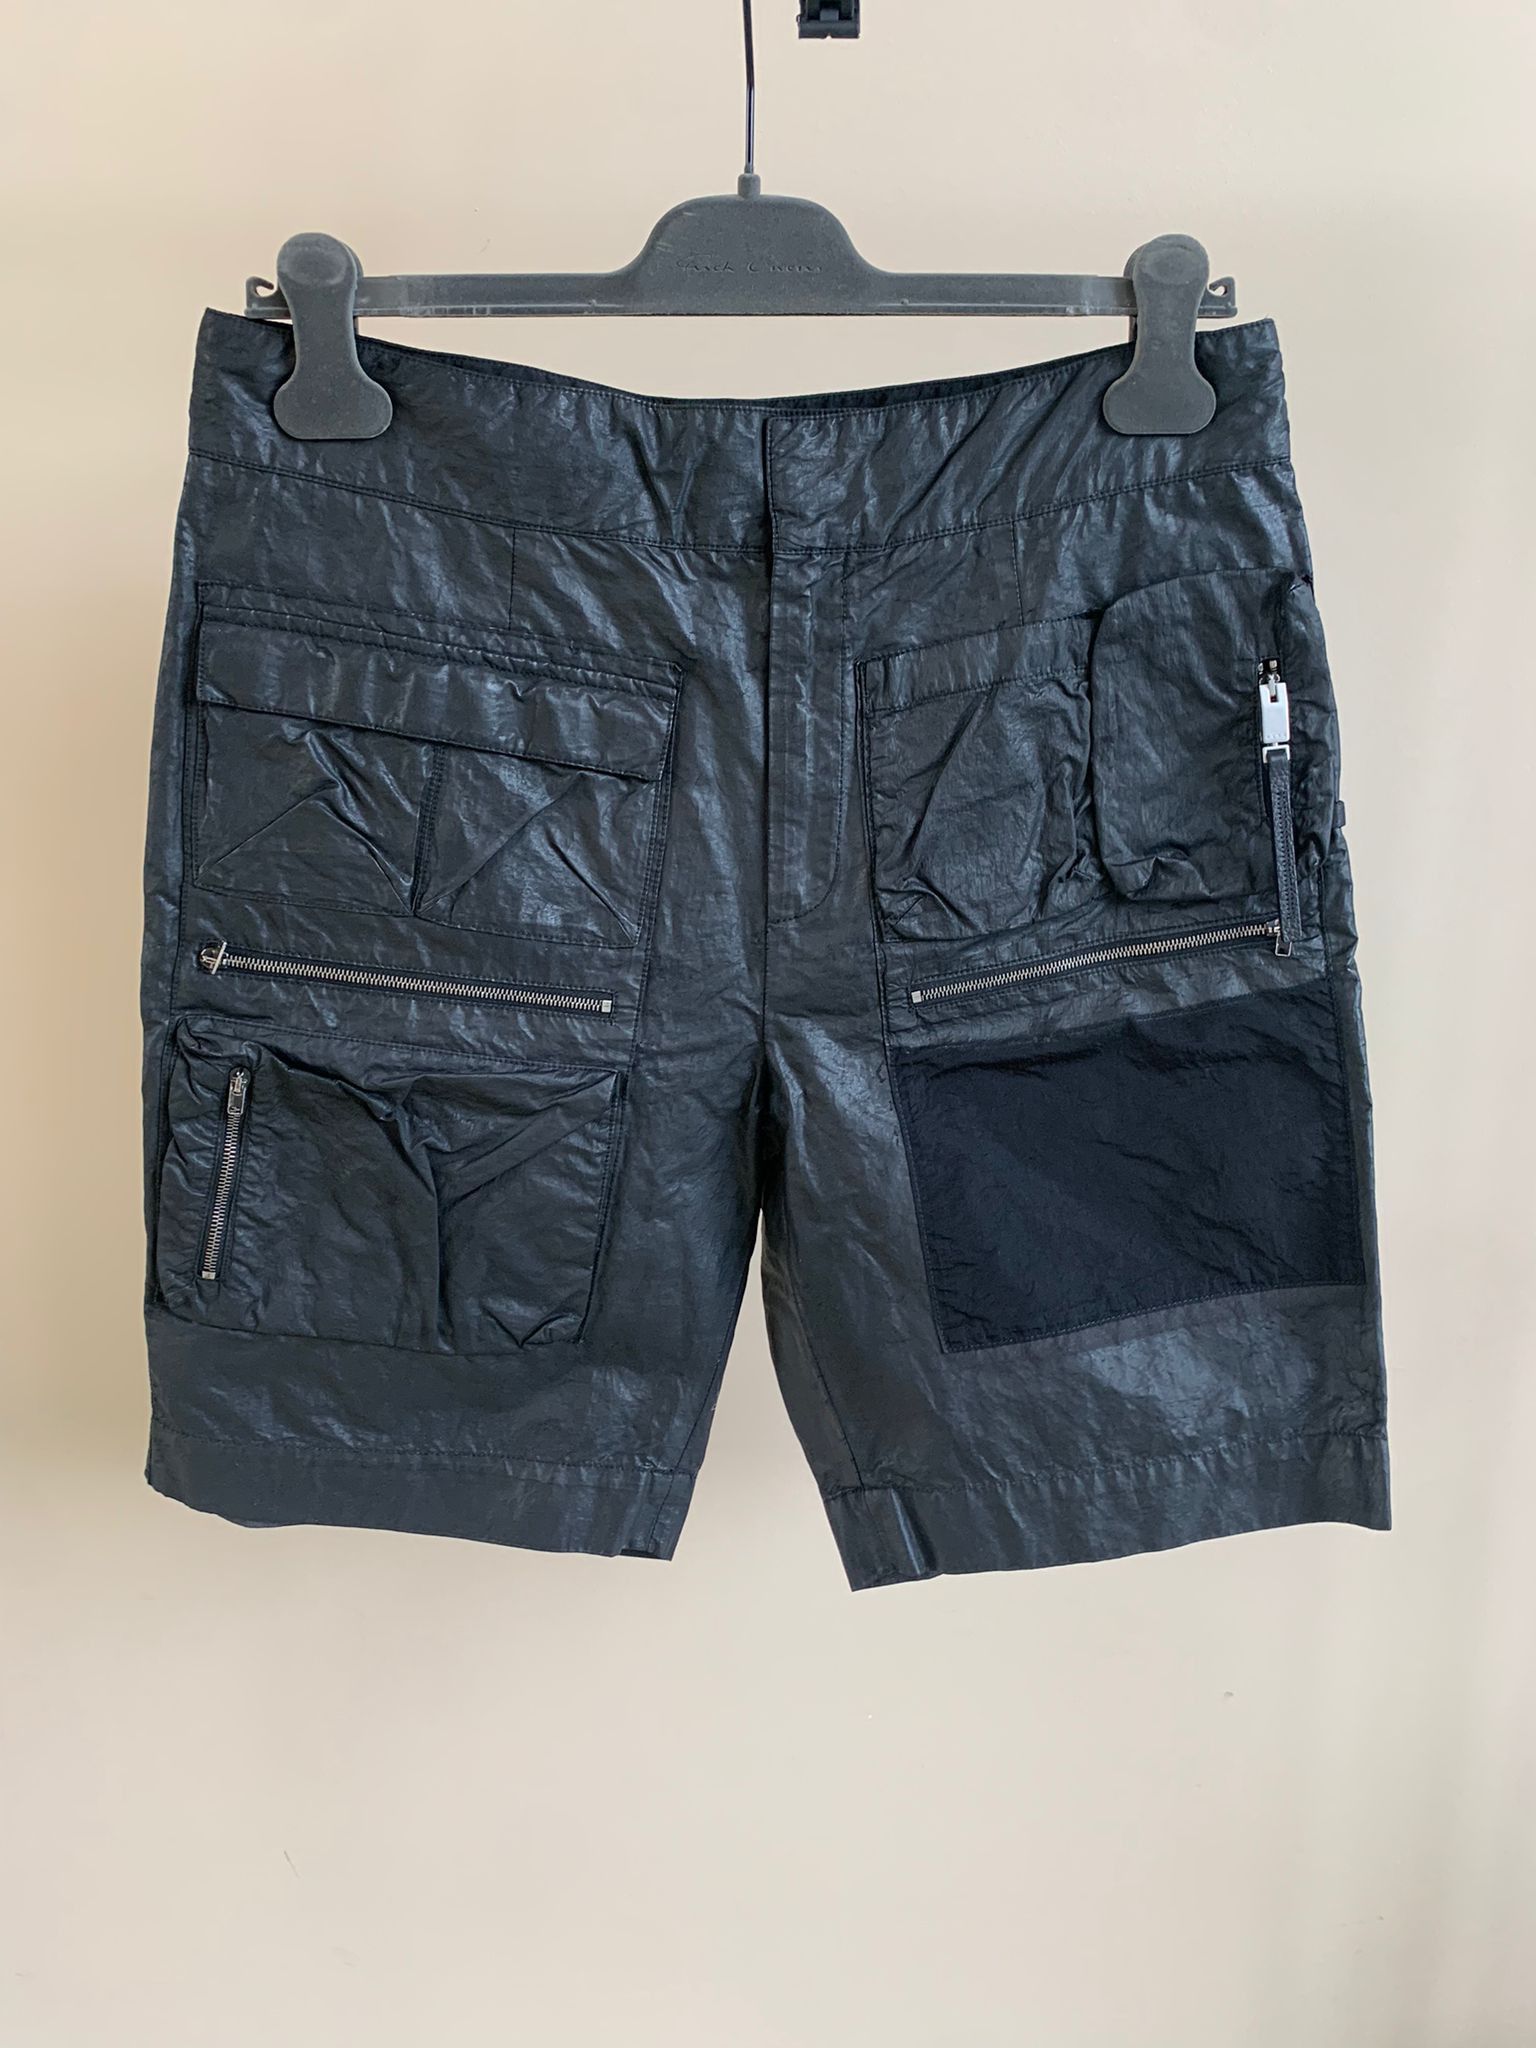 Alyx Multi-pocket Cargo Tactical Shorts in Black Coated | Grailed